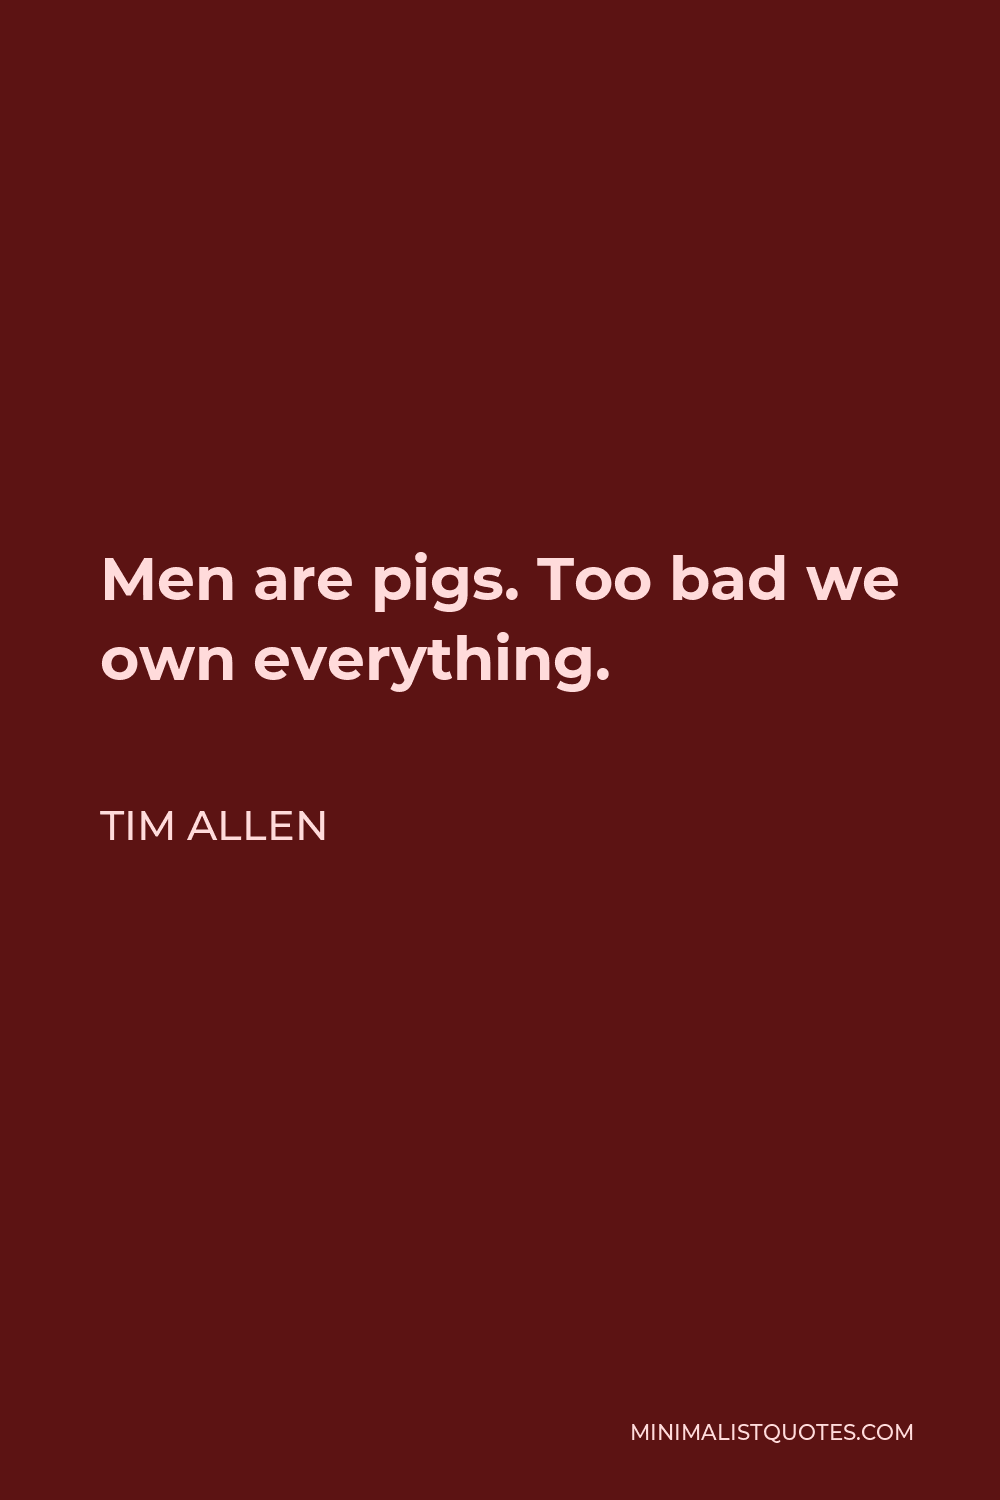 Tim Allen Quote - Men are pigs. Too bad we own everything.